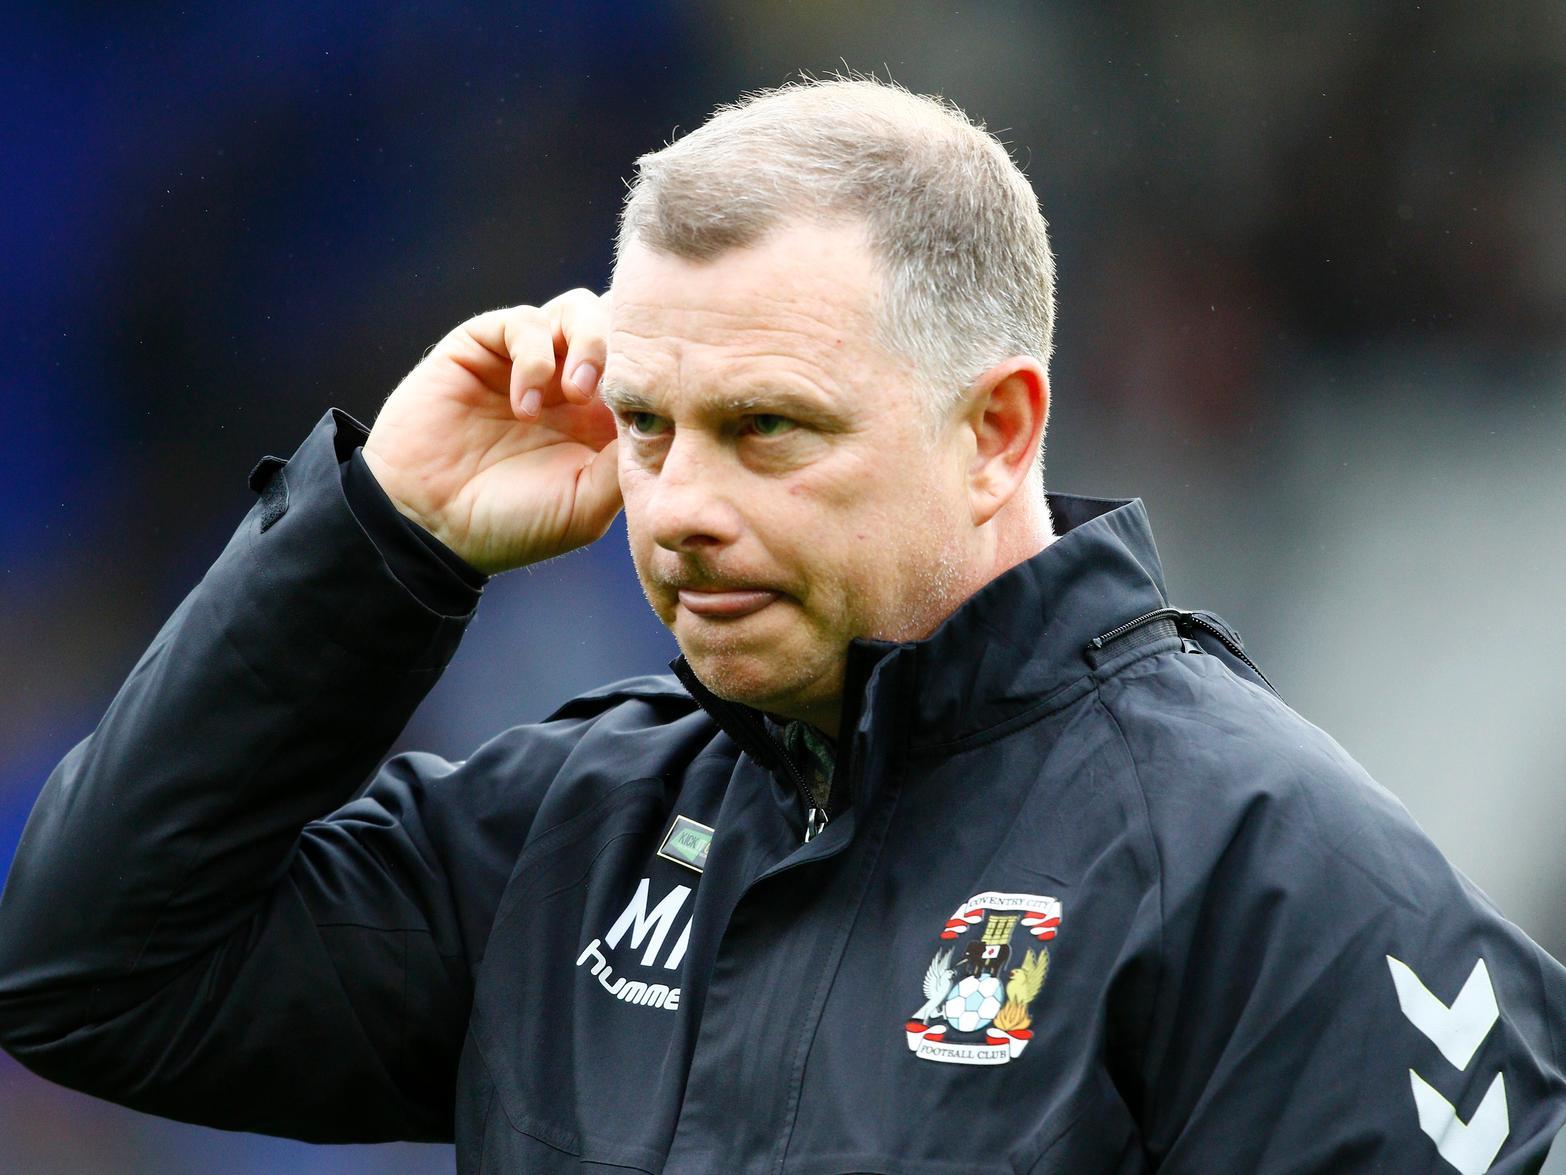 Birmingham City are said to be considering a swoop for Coventry City boss Mark Robins, amid concerns that Pep Clotet may a suitable long-term solution for the Blues. (Team Talk)